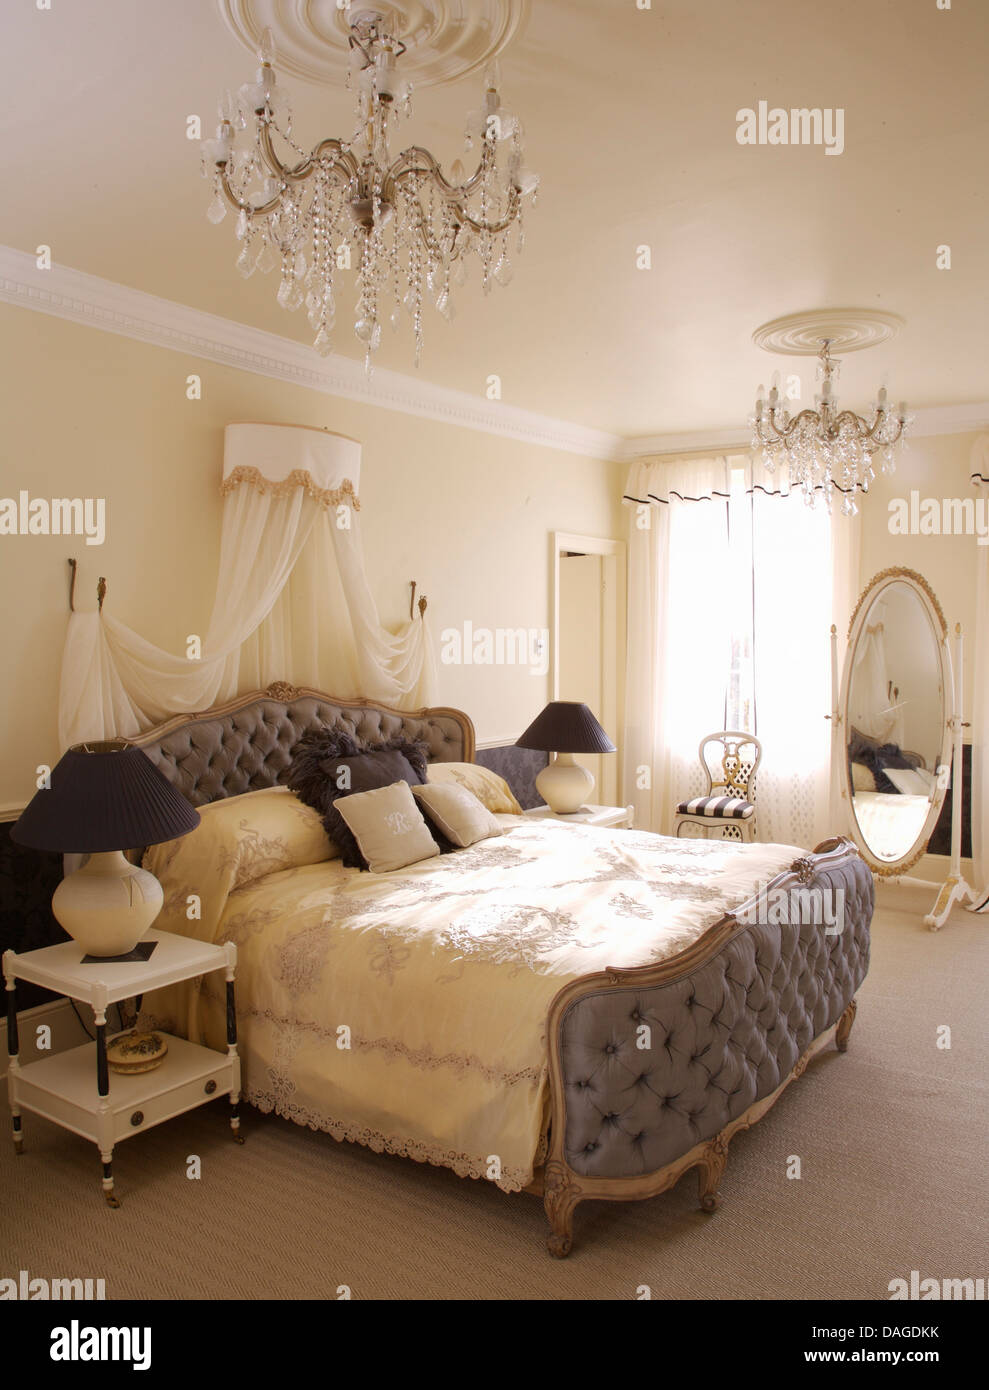 Upholstered double bed with white voile drapes in opulent bedroom with glass chandelier and cheval mirror Stock Photo